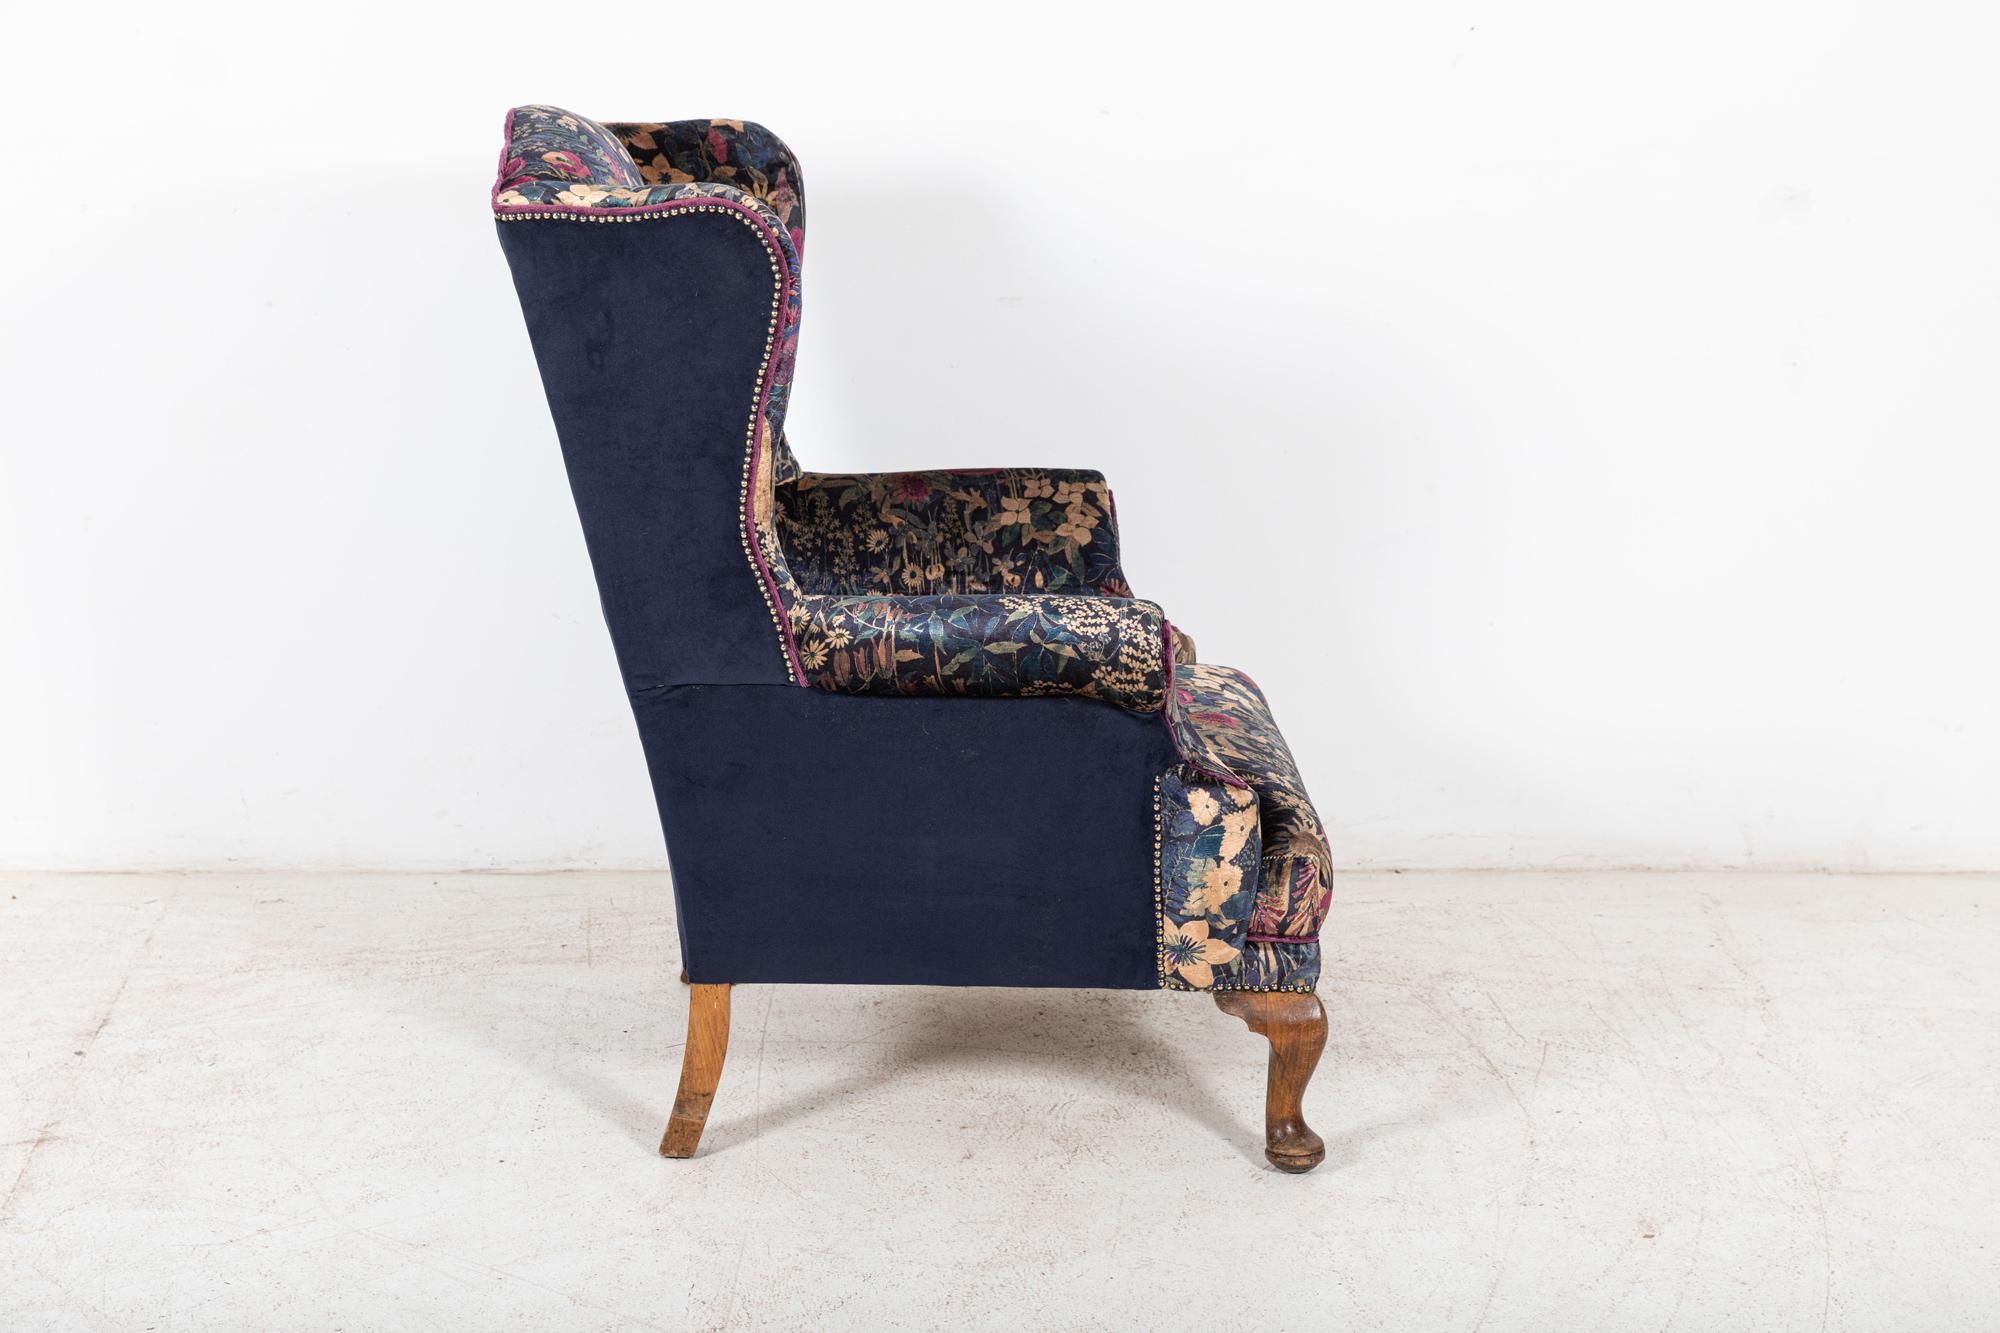 19thC English Mahogany Wingback Armchair Re-Upholstered in Liberty For Sale 6